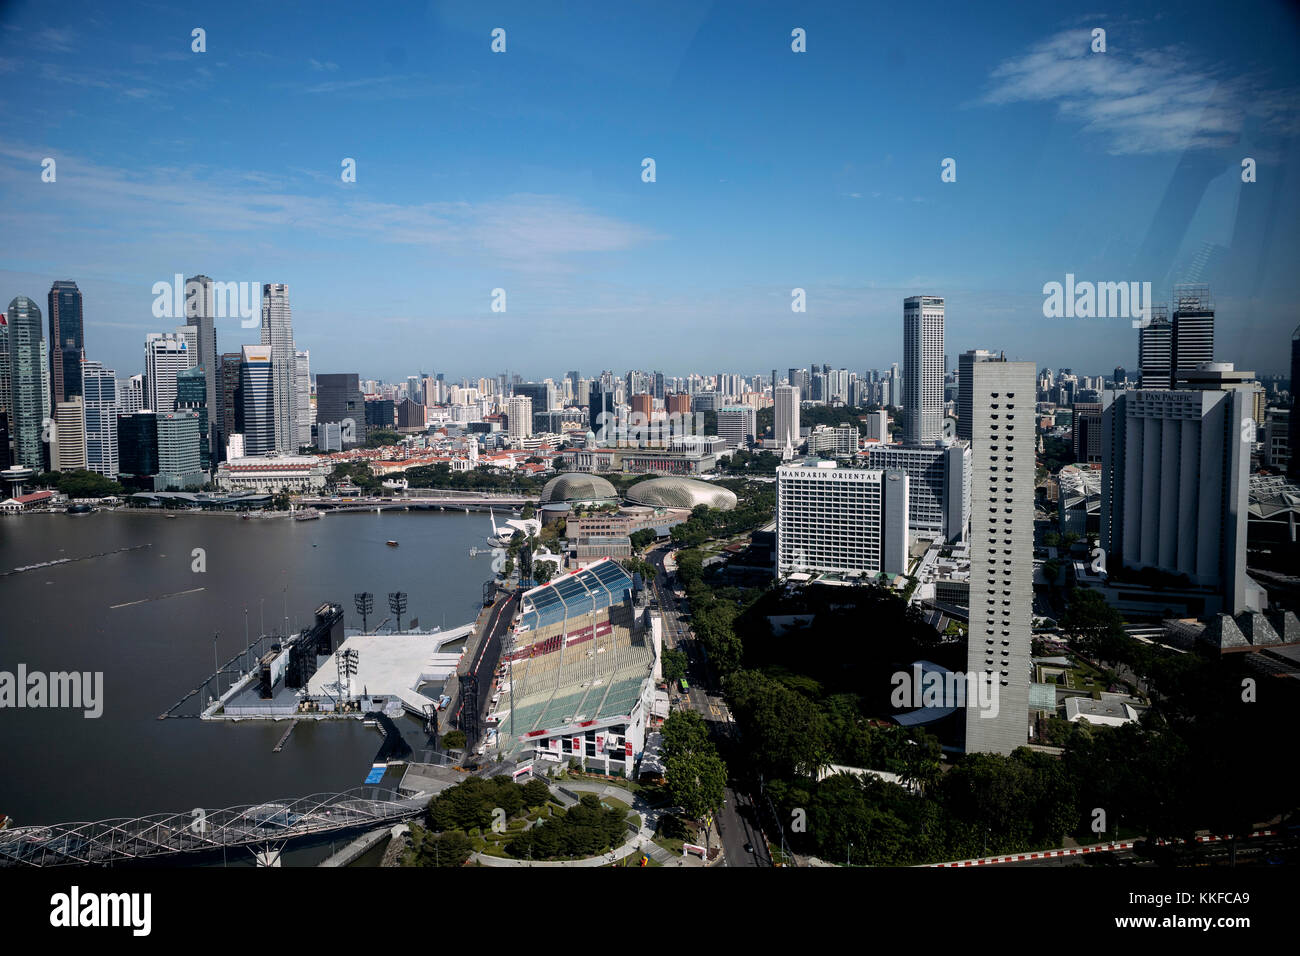 Daytime shot of  the Marina Bay area in Singapore, taken from the Singapore Flyer Wheel showing the skyline of Singapore Stock Photo